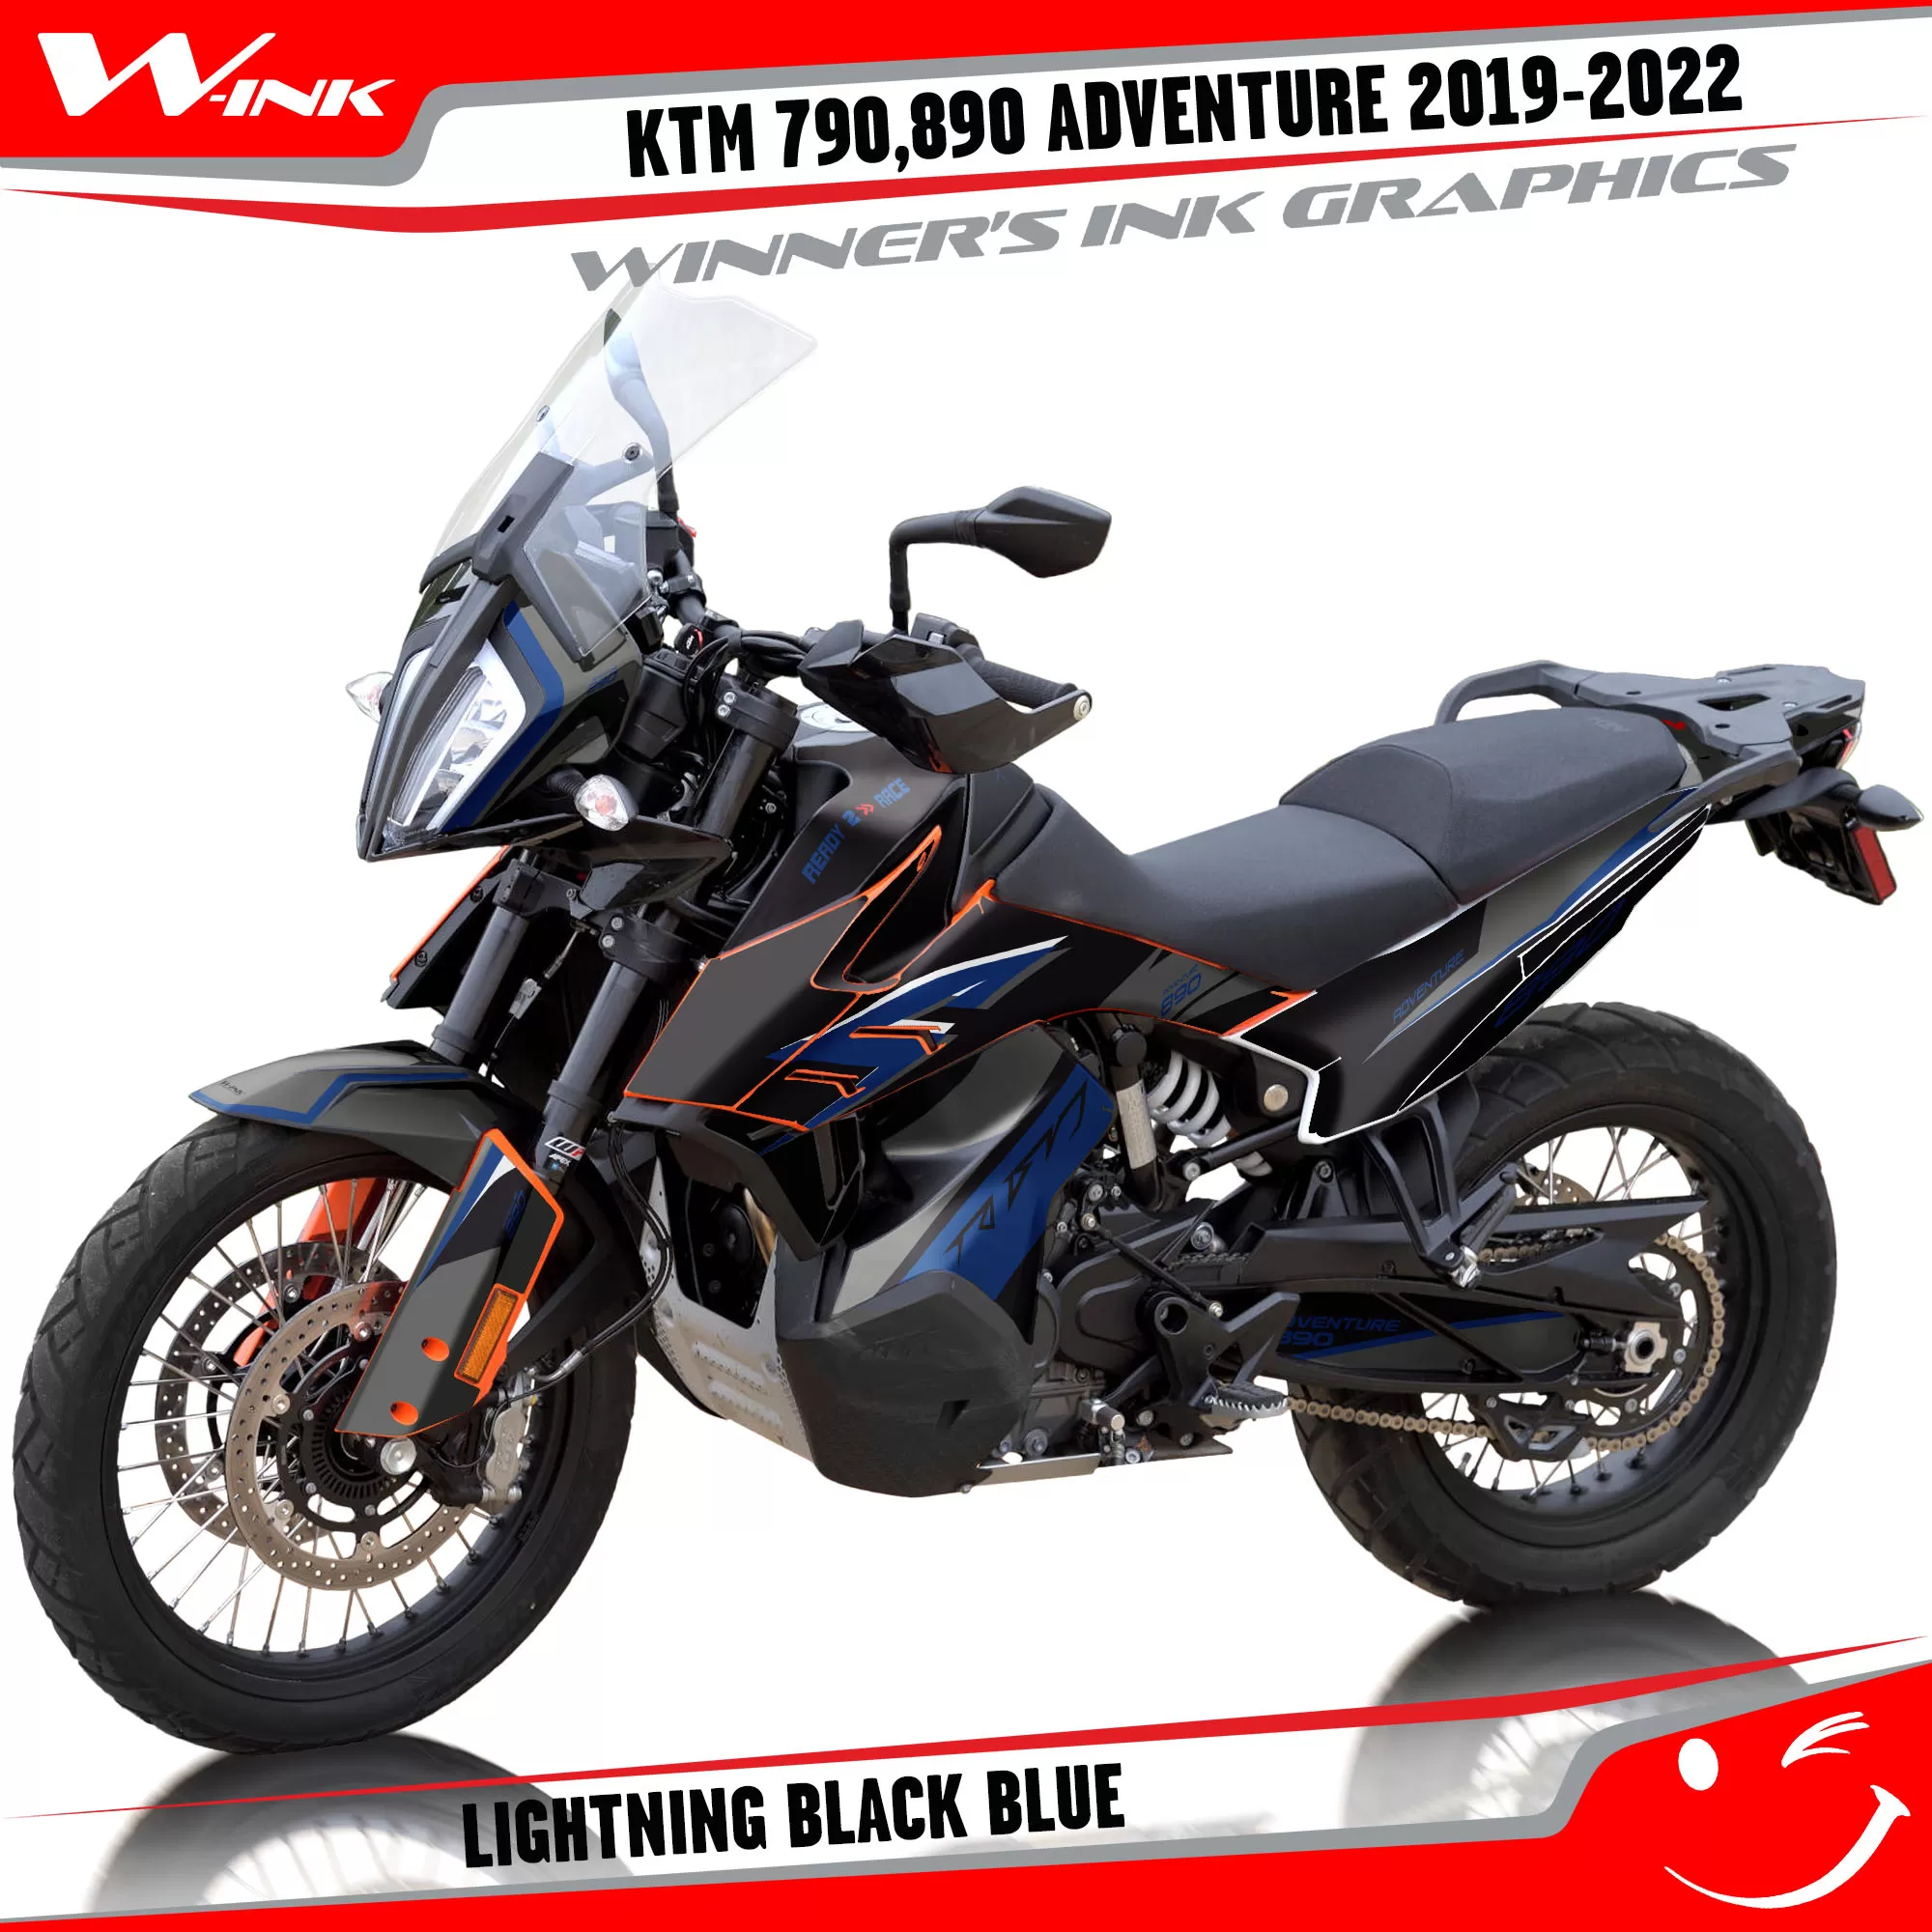 Adventure-790-890-2019-2020-2021-2022-graphics-kit-and-decals-with-designs-Lightning-Black-Blue